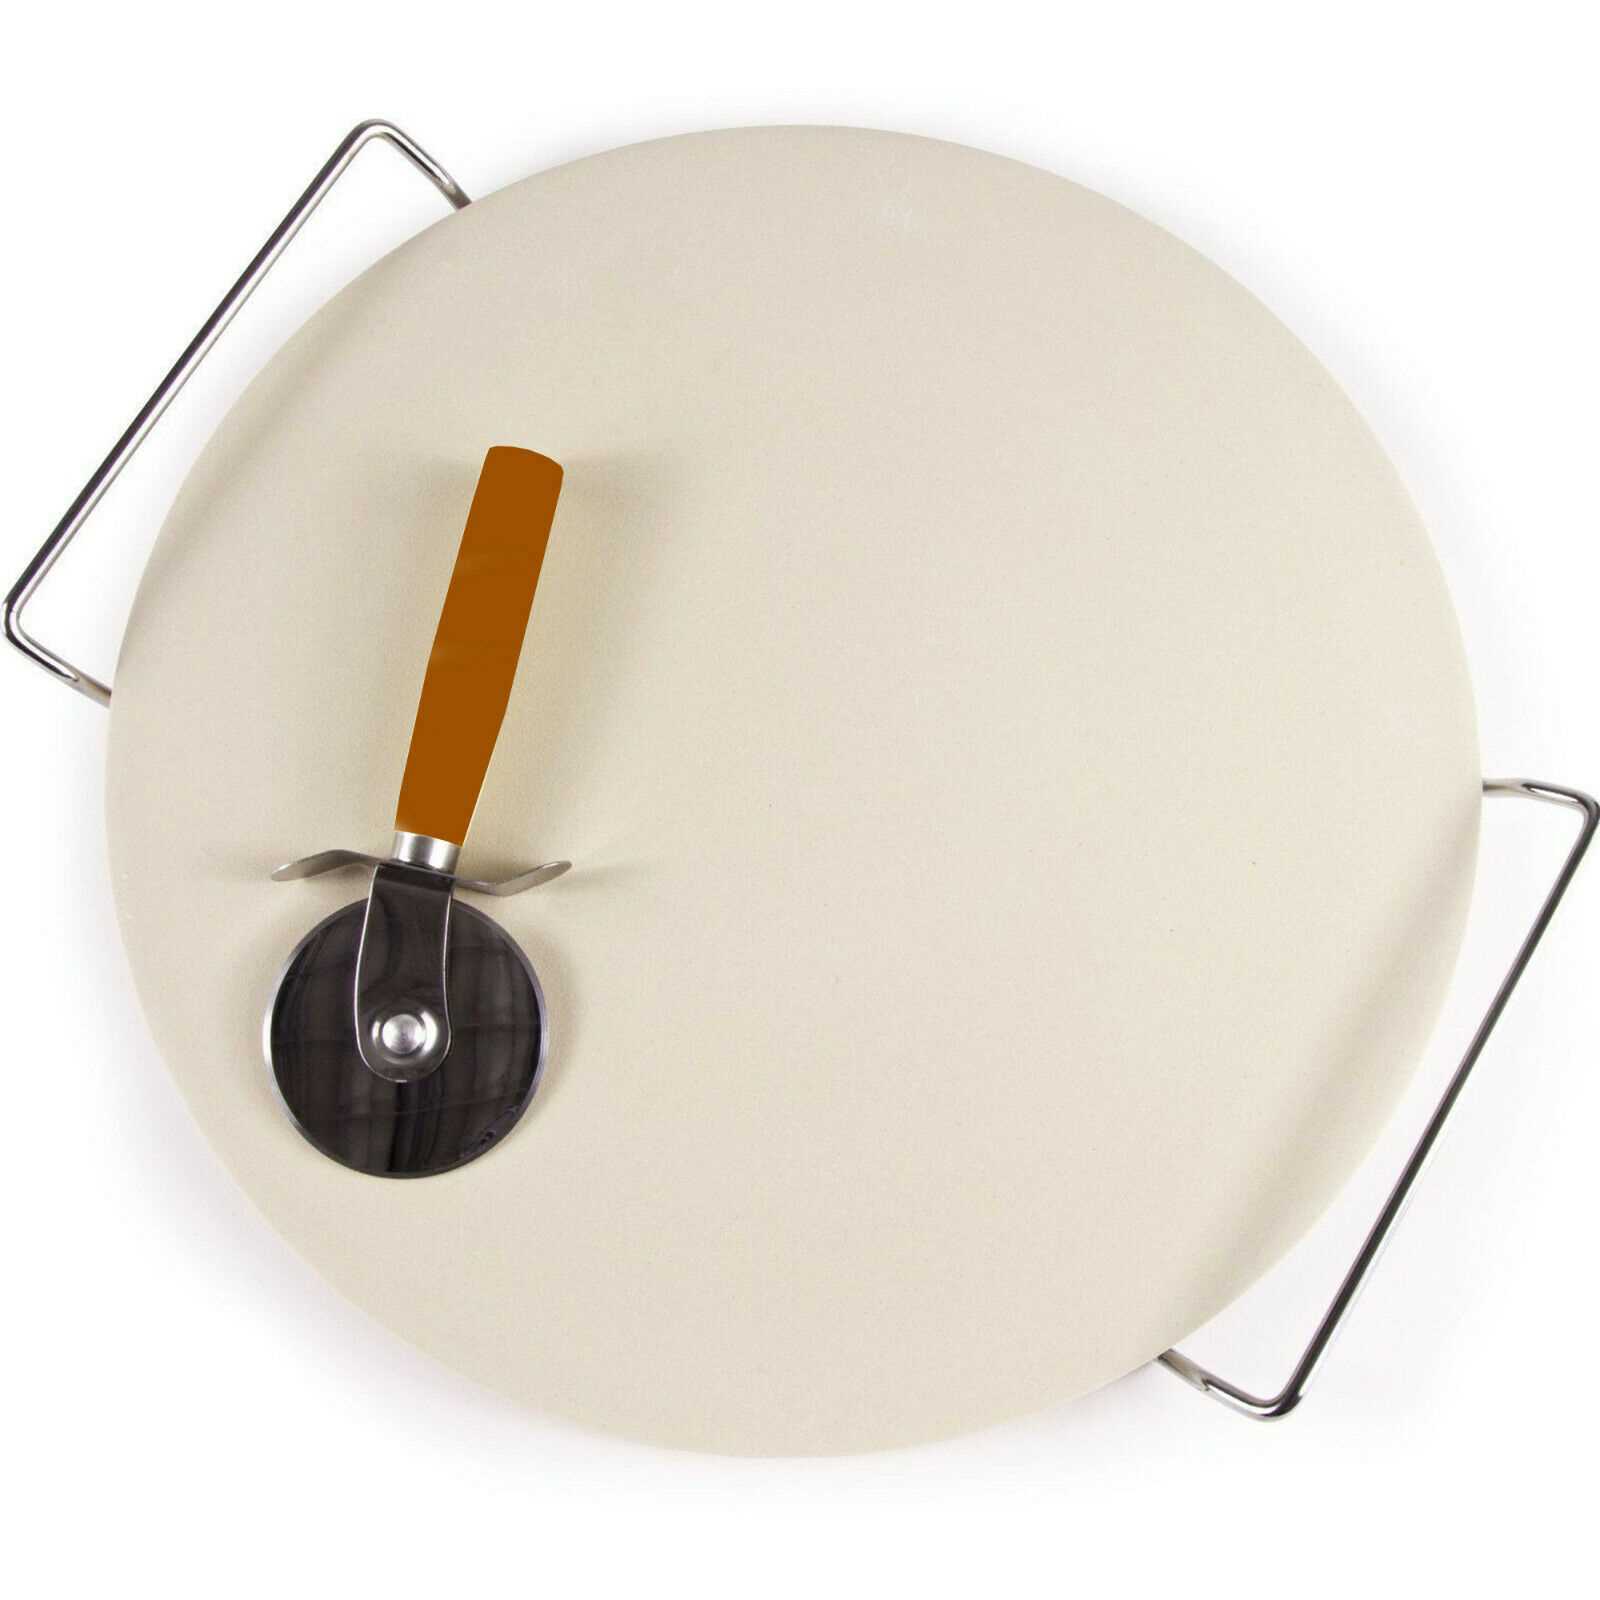 Extra Large Ceramic Pizza Baking Stone Set Chrome Stand 33cm + Free Pizza Cutter